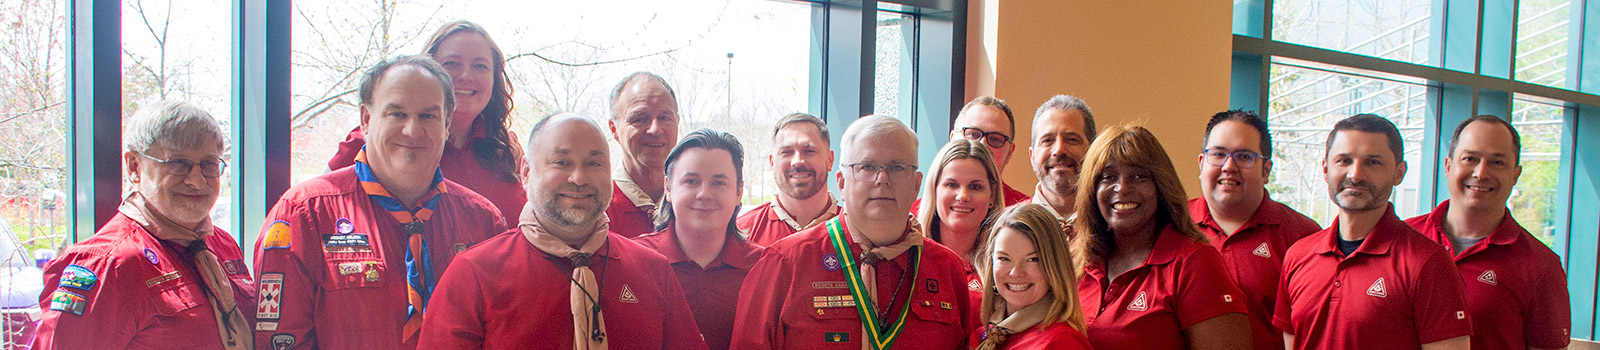 Scouts Canada's Leadership Team